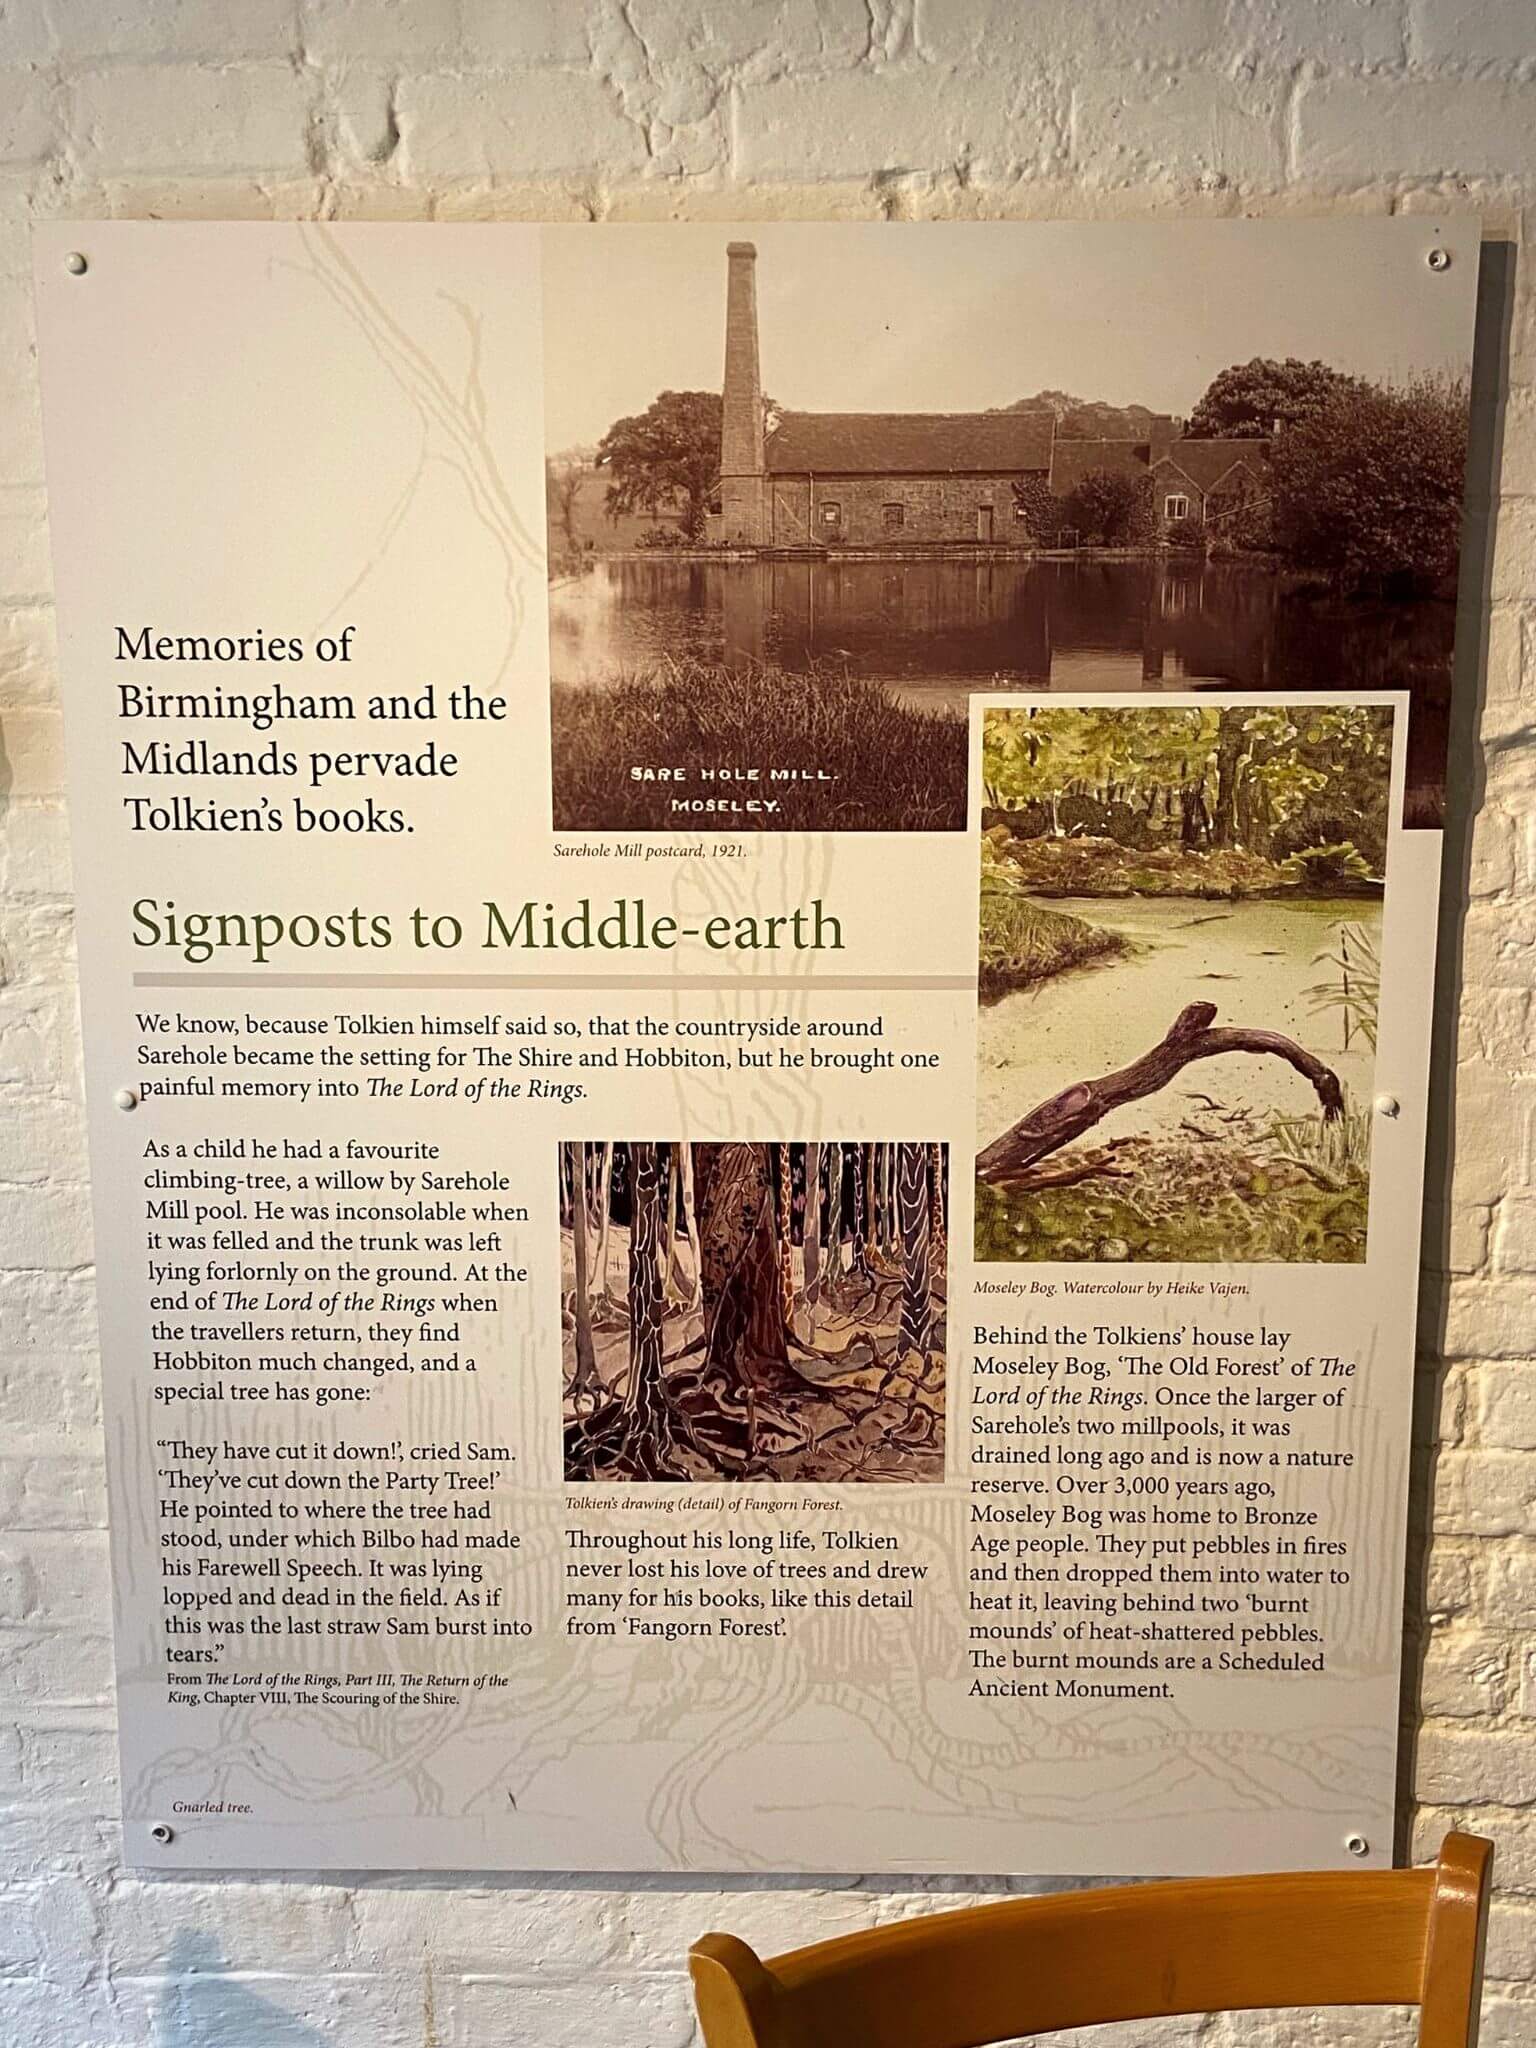 Information at the J.R.R Tolkien Gallery, Sarehole Mill